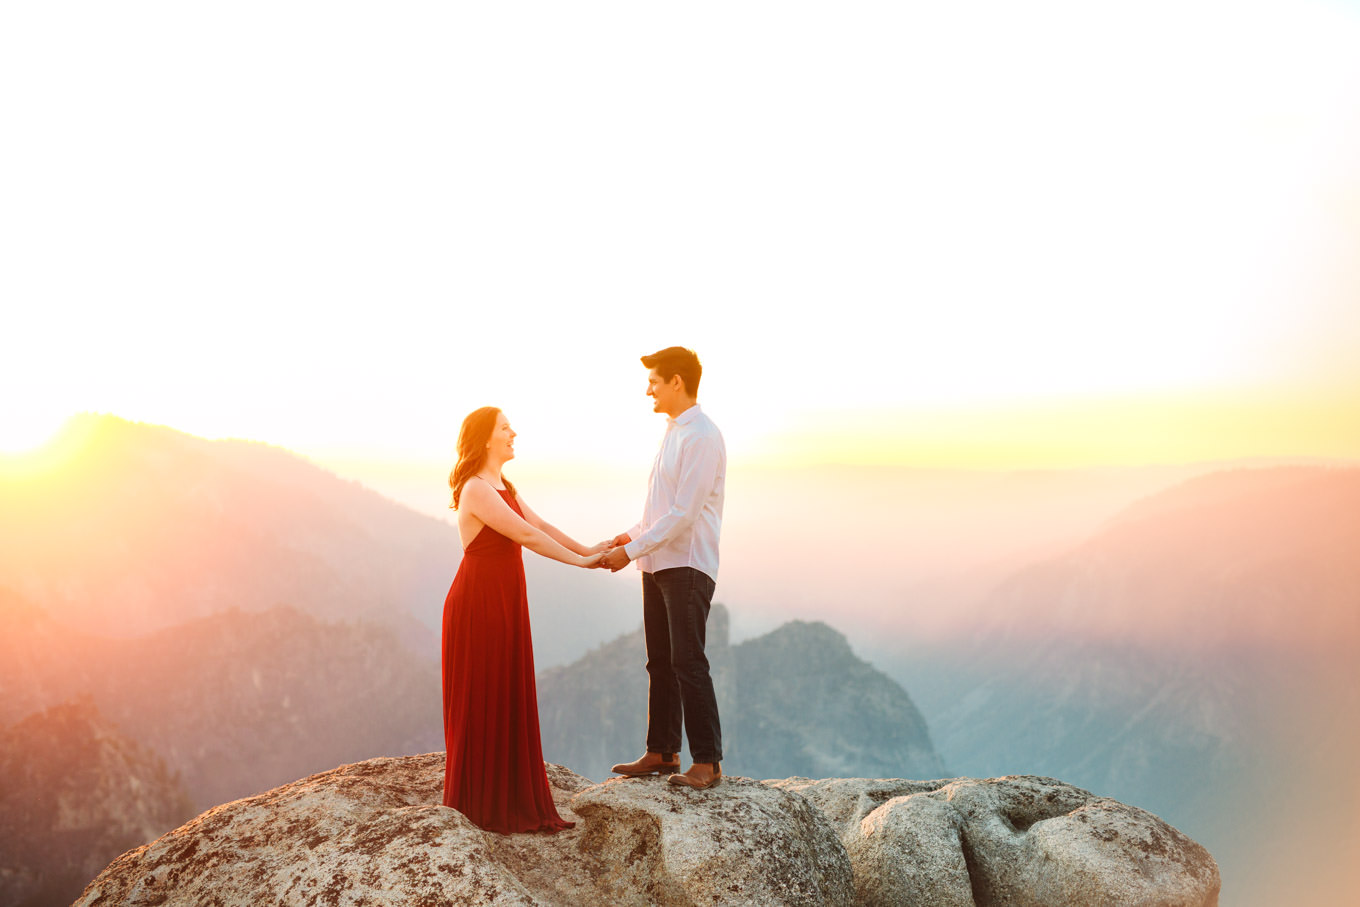 Yosemite National Park Taft Point engagement session Los Angeles Chinatown engagement session | Engagement, elopement, and wedding photography roundup of Mary Costa’s favorite images from 2020 | Colorful and elevated photography for fun-loving couples in Southern California | #2020wedding #elopement #weddingphoto #weddingphotography #microwedding   Source: Mary Costa Photography | Los Angeles